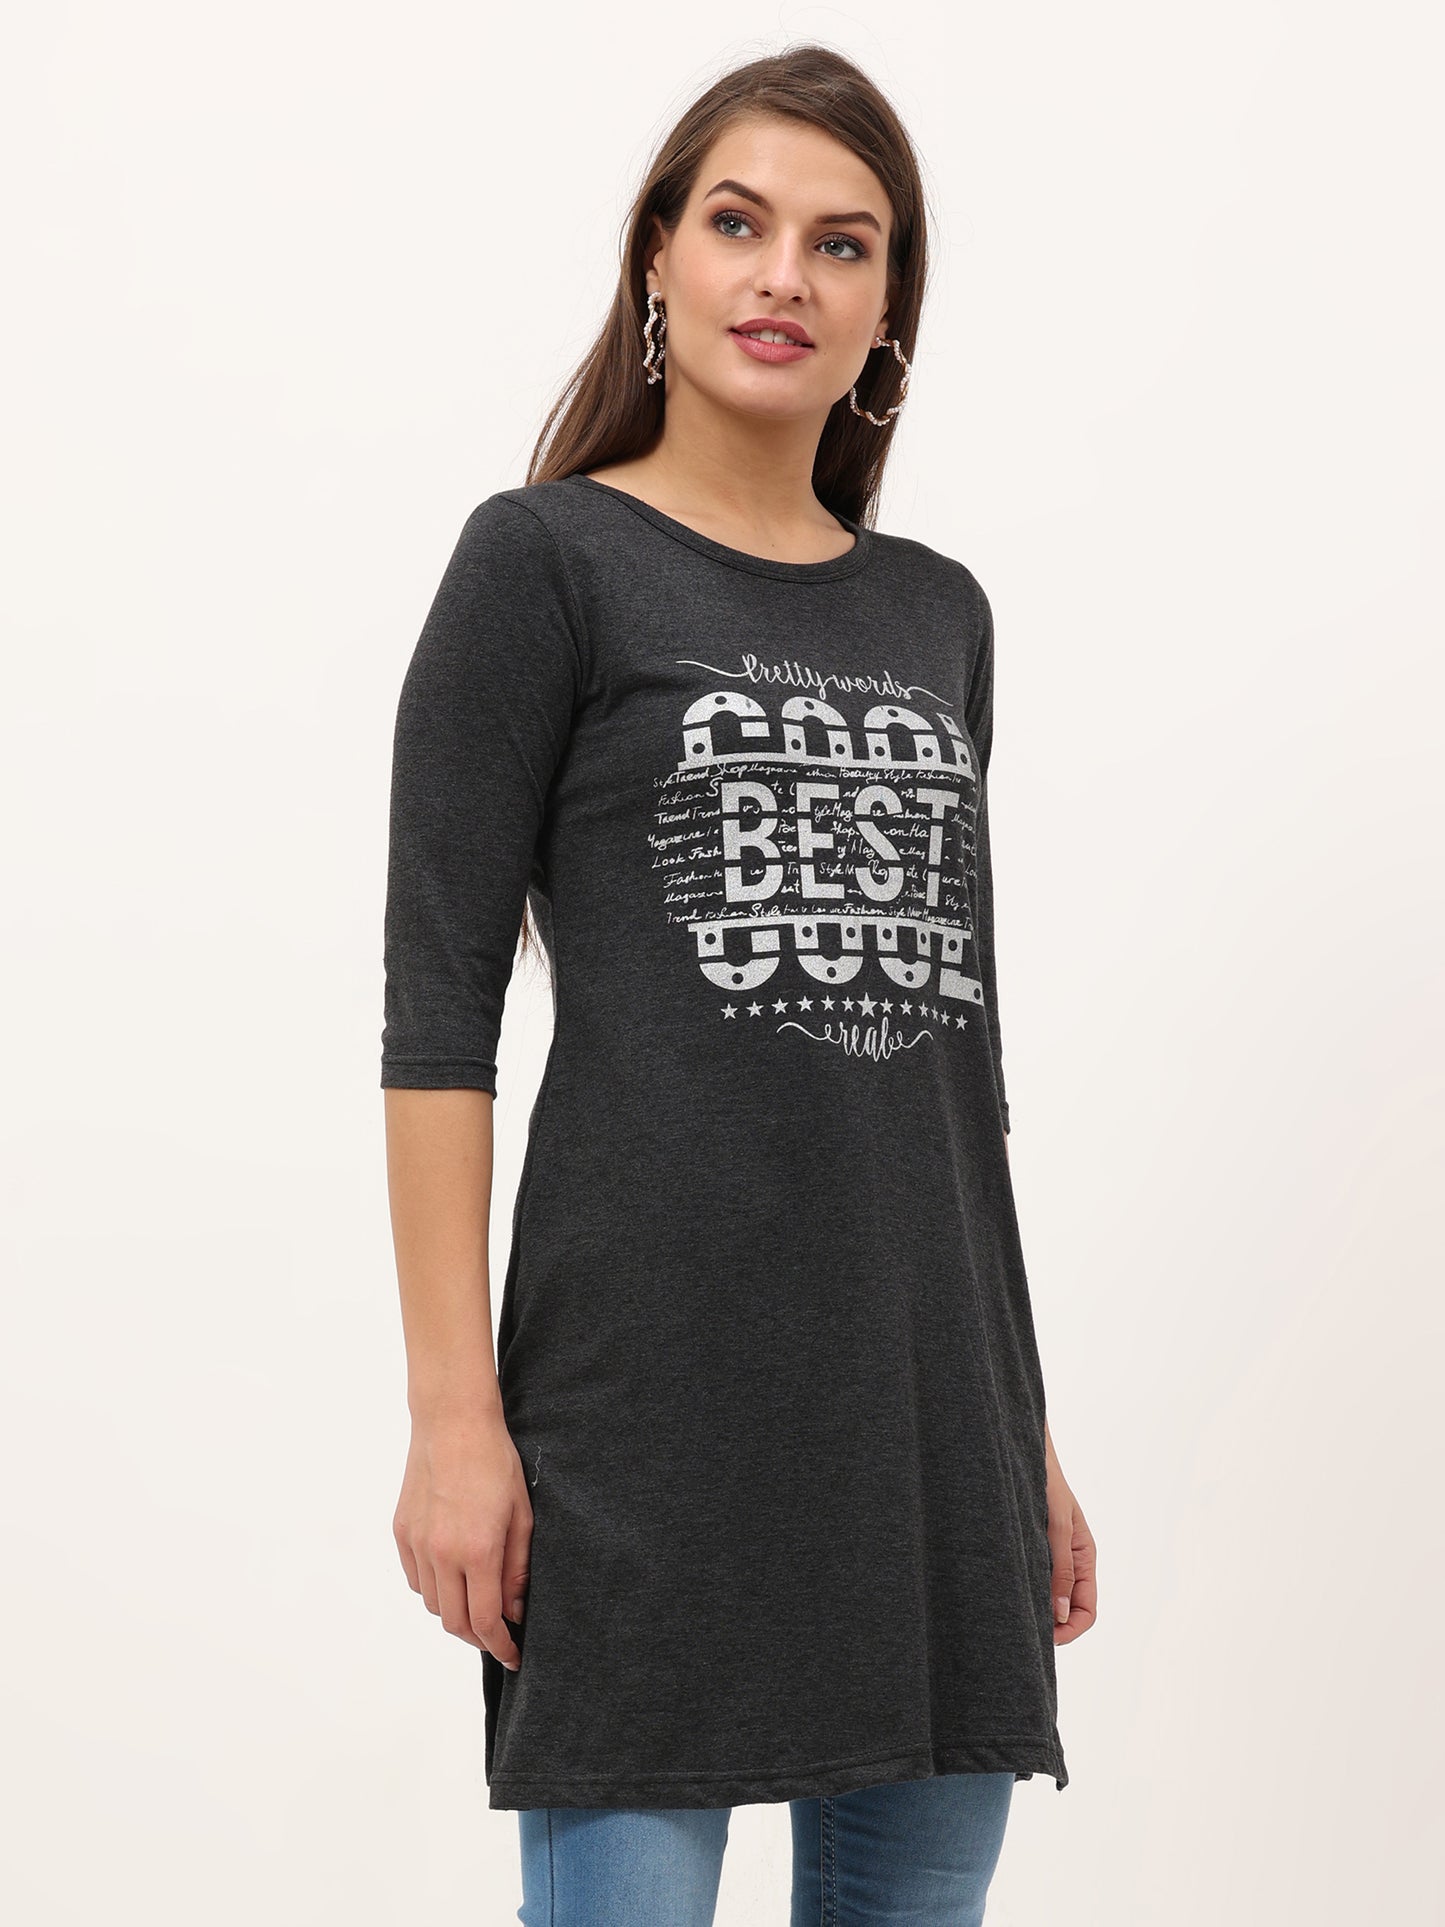 Women's Cotton Printed 3/4 Sleeve Long Top